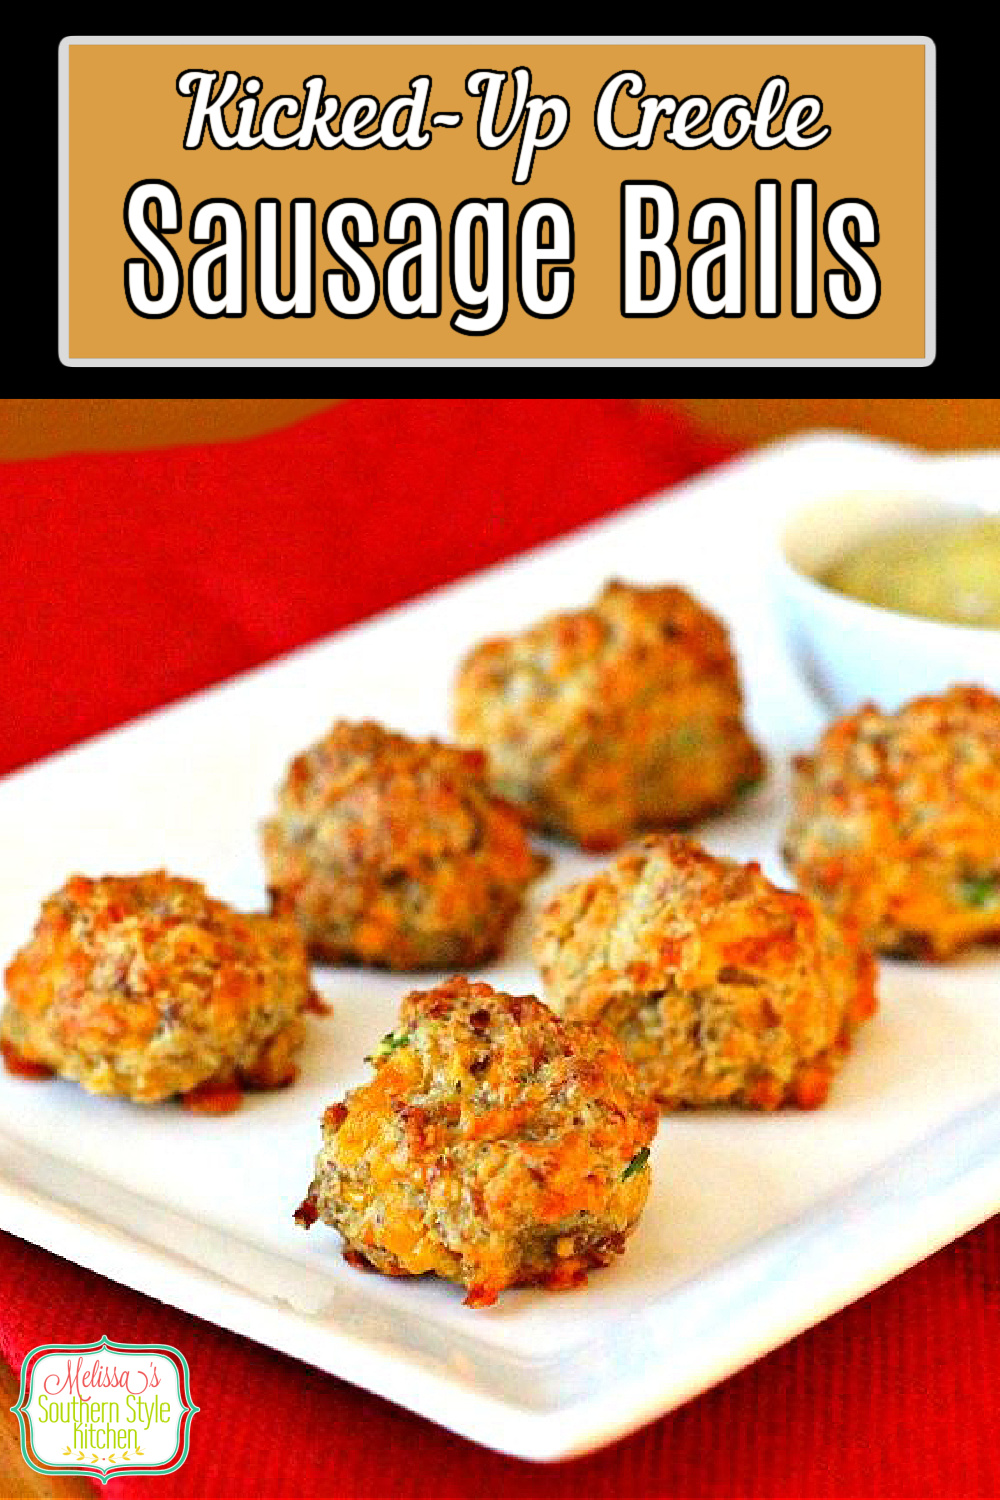 Whether it's Fat Tuesday, Mardis Gras or the holidays, these Kicked Up Creole Sausage Balls feature a flavor twist that makes them perfect for your appetizer menu #sausageballs #appetizers #creolesausageballs #fattuesday #mardisgras #sausagerecipes #holidayappetizers #snacks #brunch #partyfood #footballfood via @melissasssk